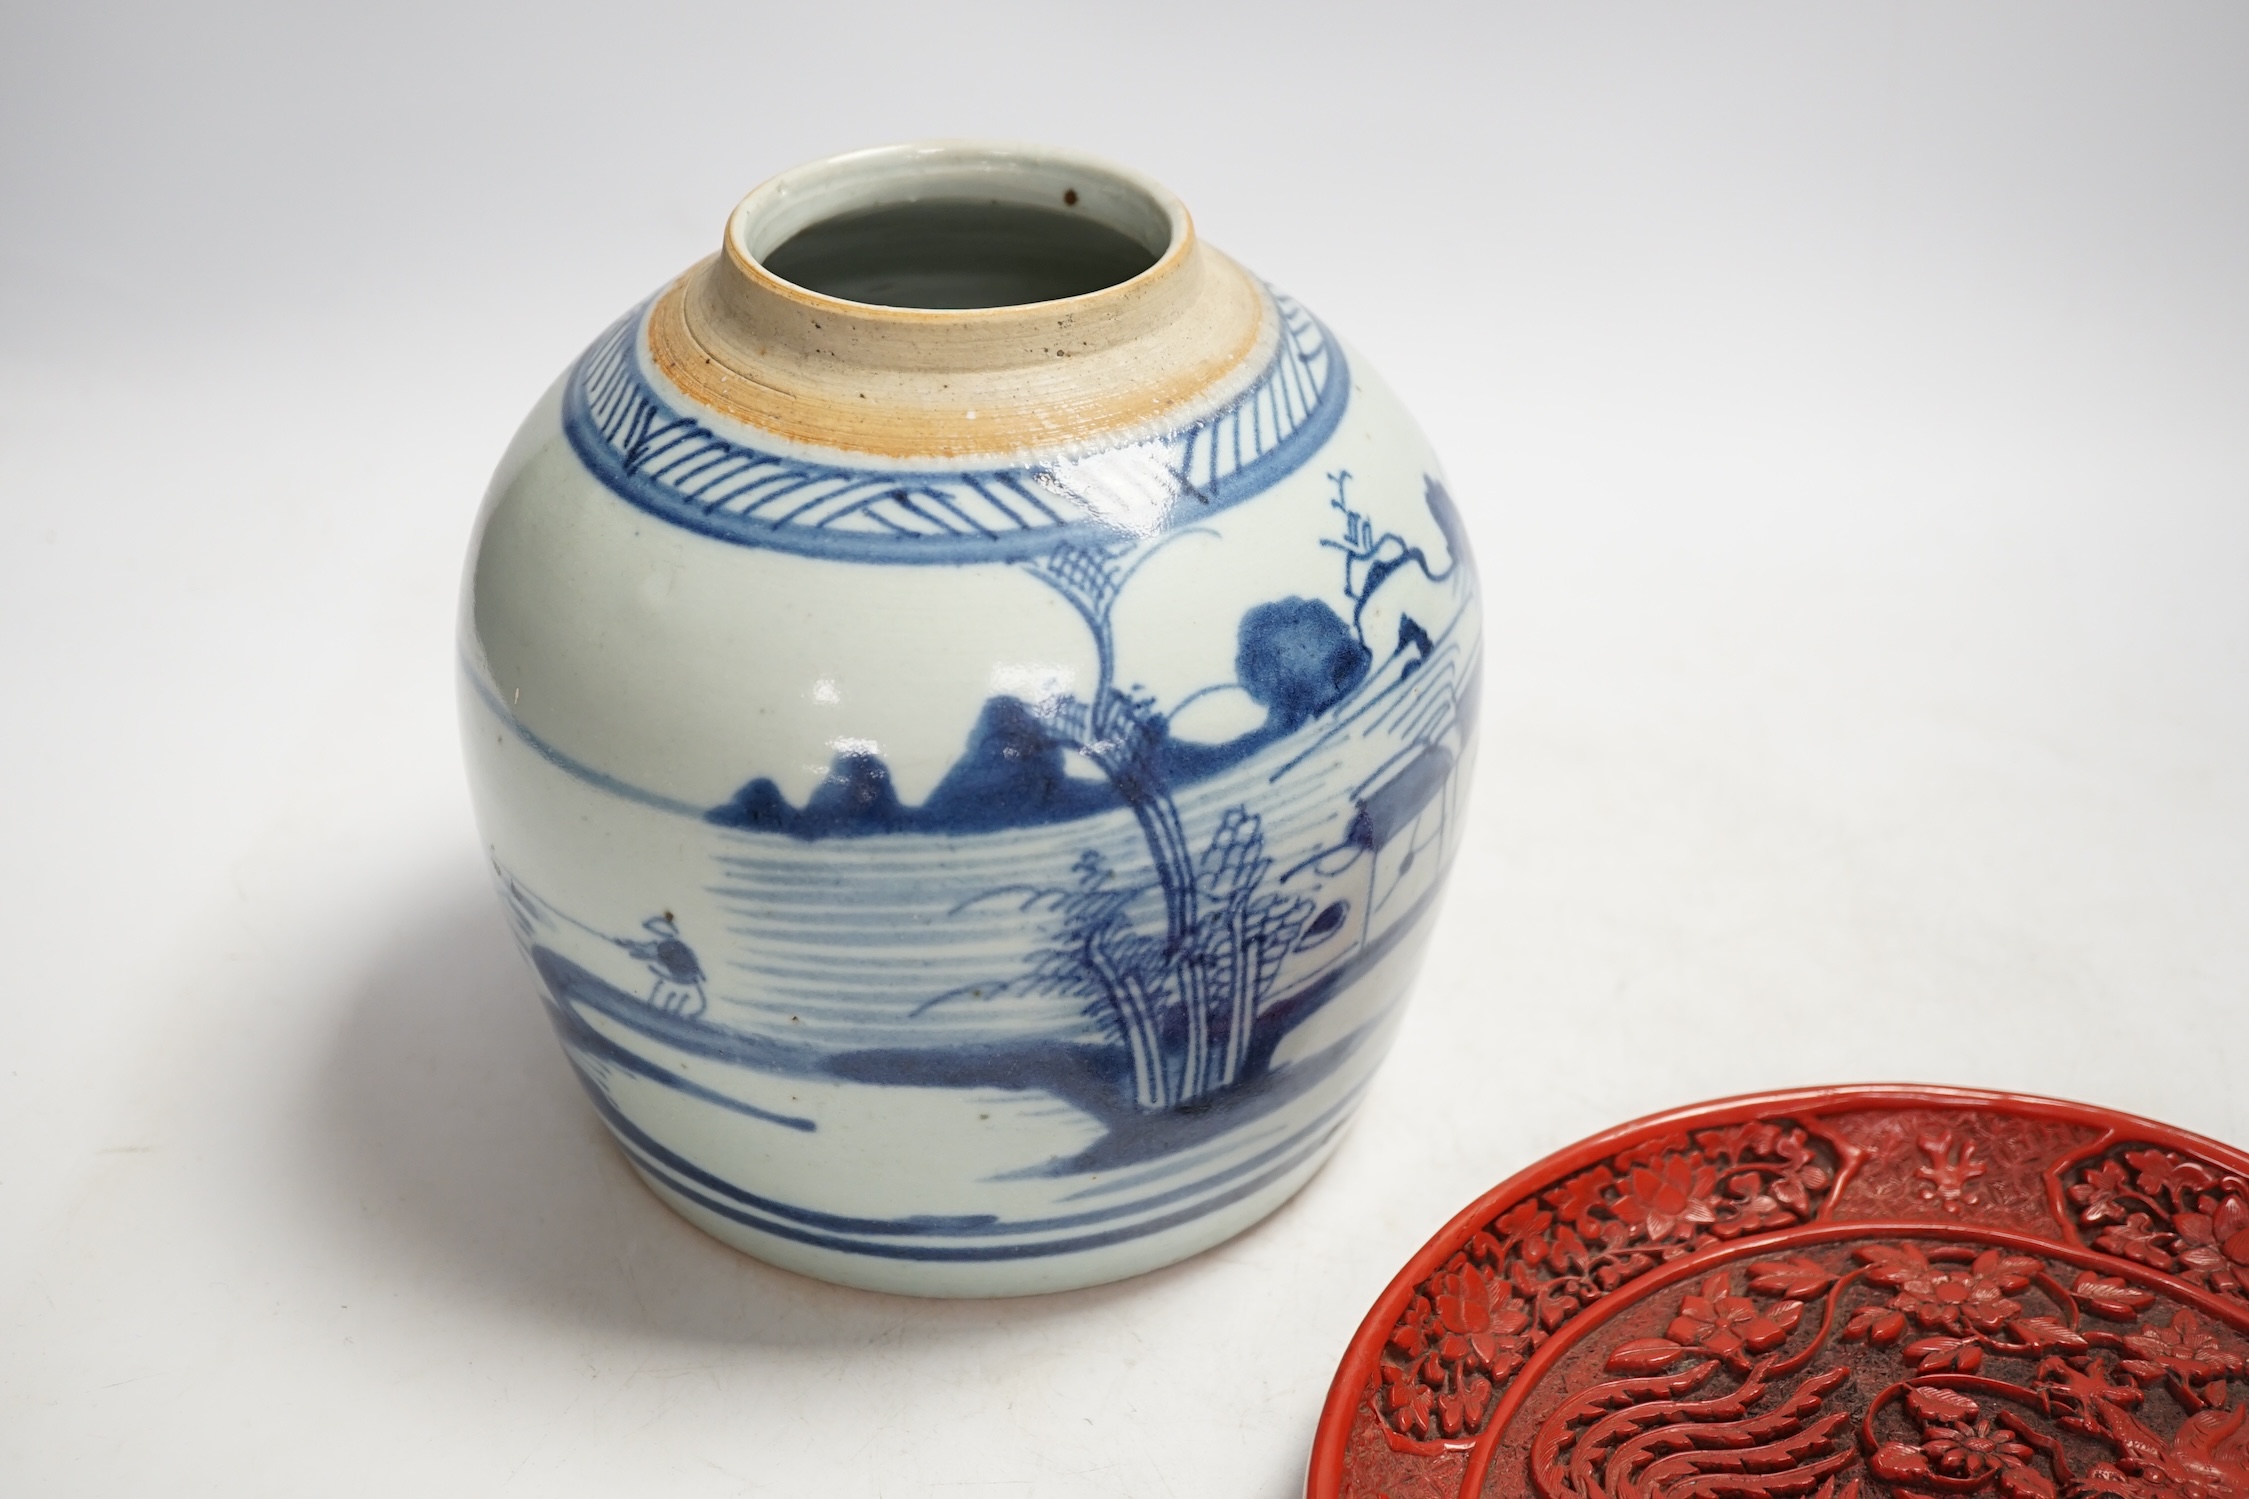 A Chinese blue and white jar and red cinnabar style lacquer tray, jar 16.5cm high. Condition - fair